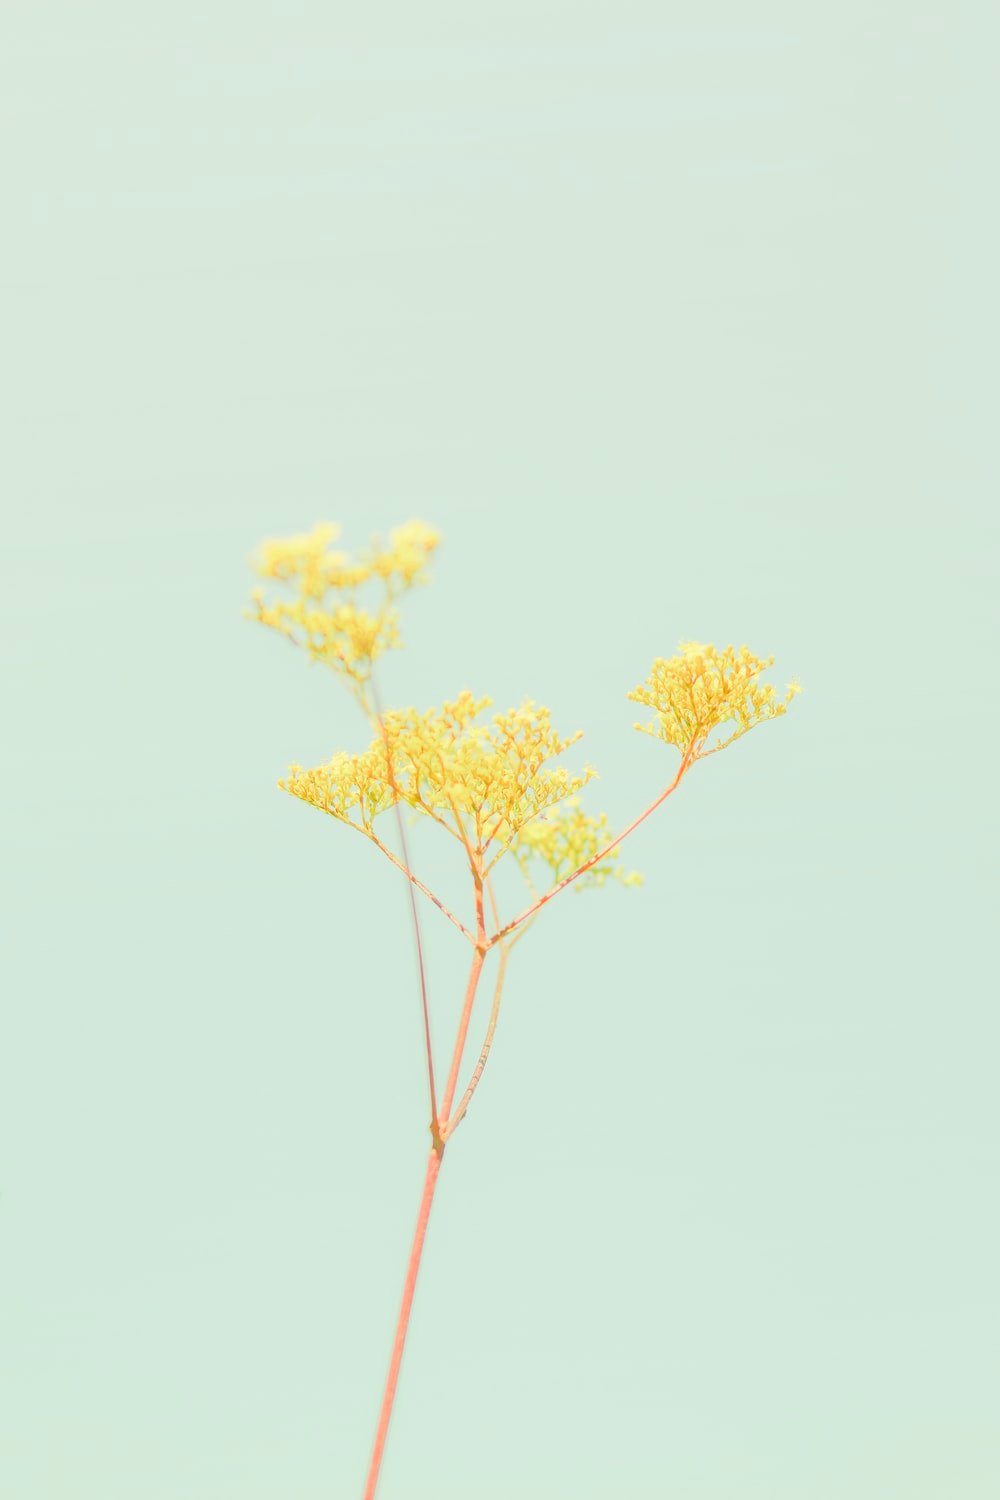 Pastel Yellow Picture. Download Free Image